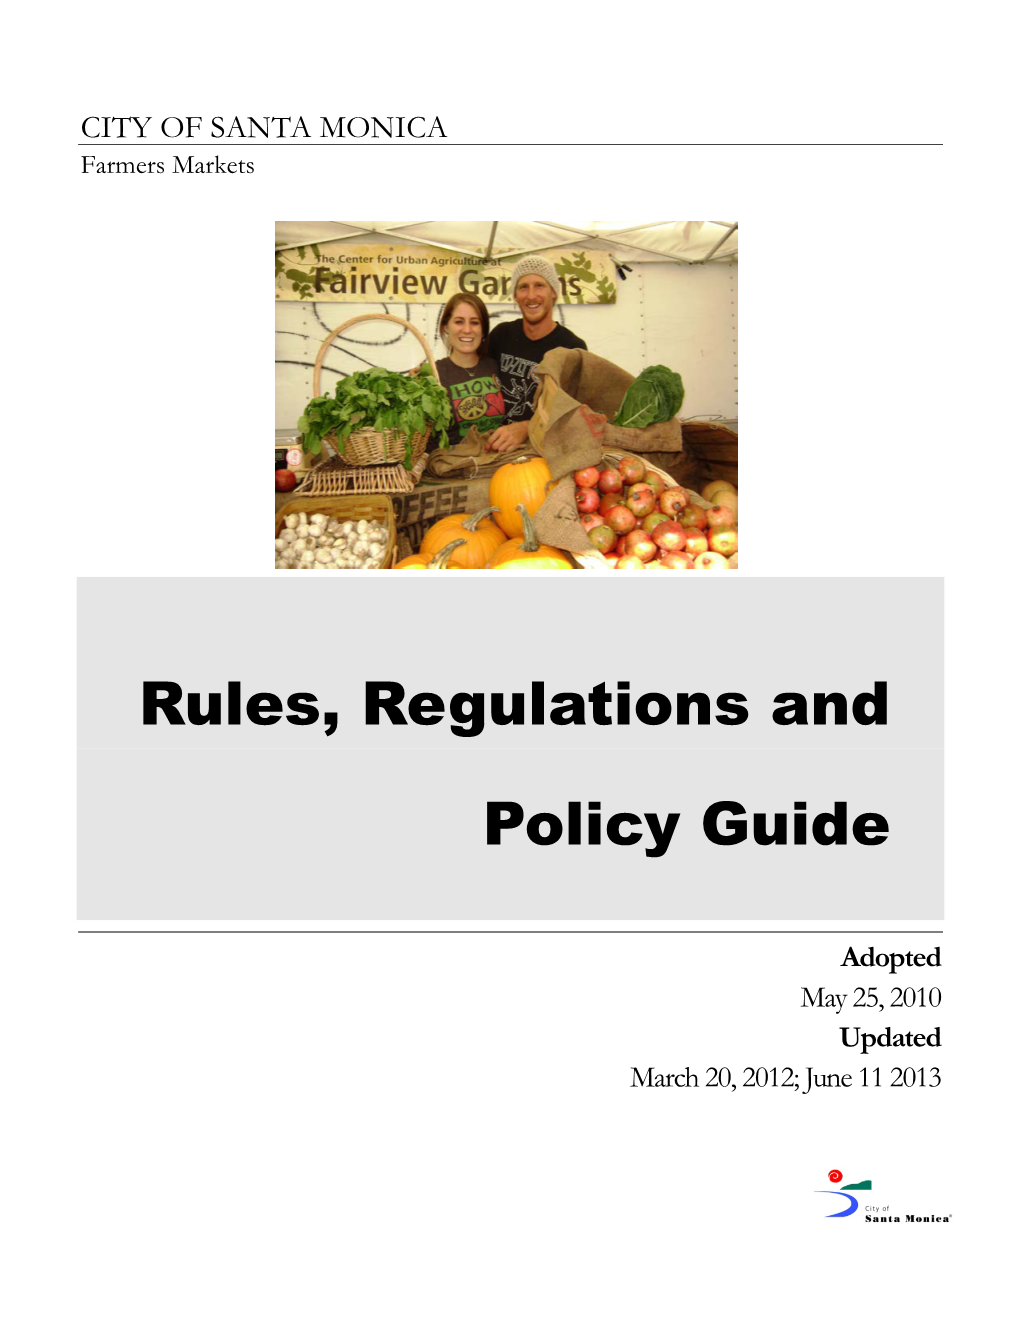 Santa Monica Farmers Market Rules, Regulations and Guidelines 2013.Pdf